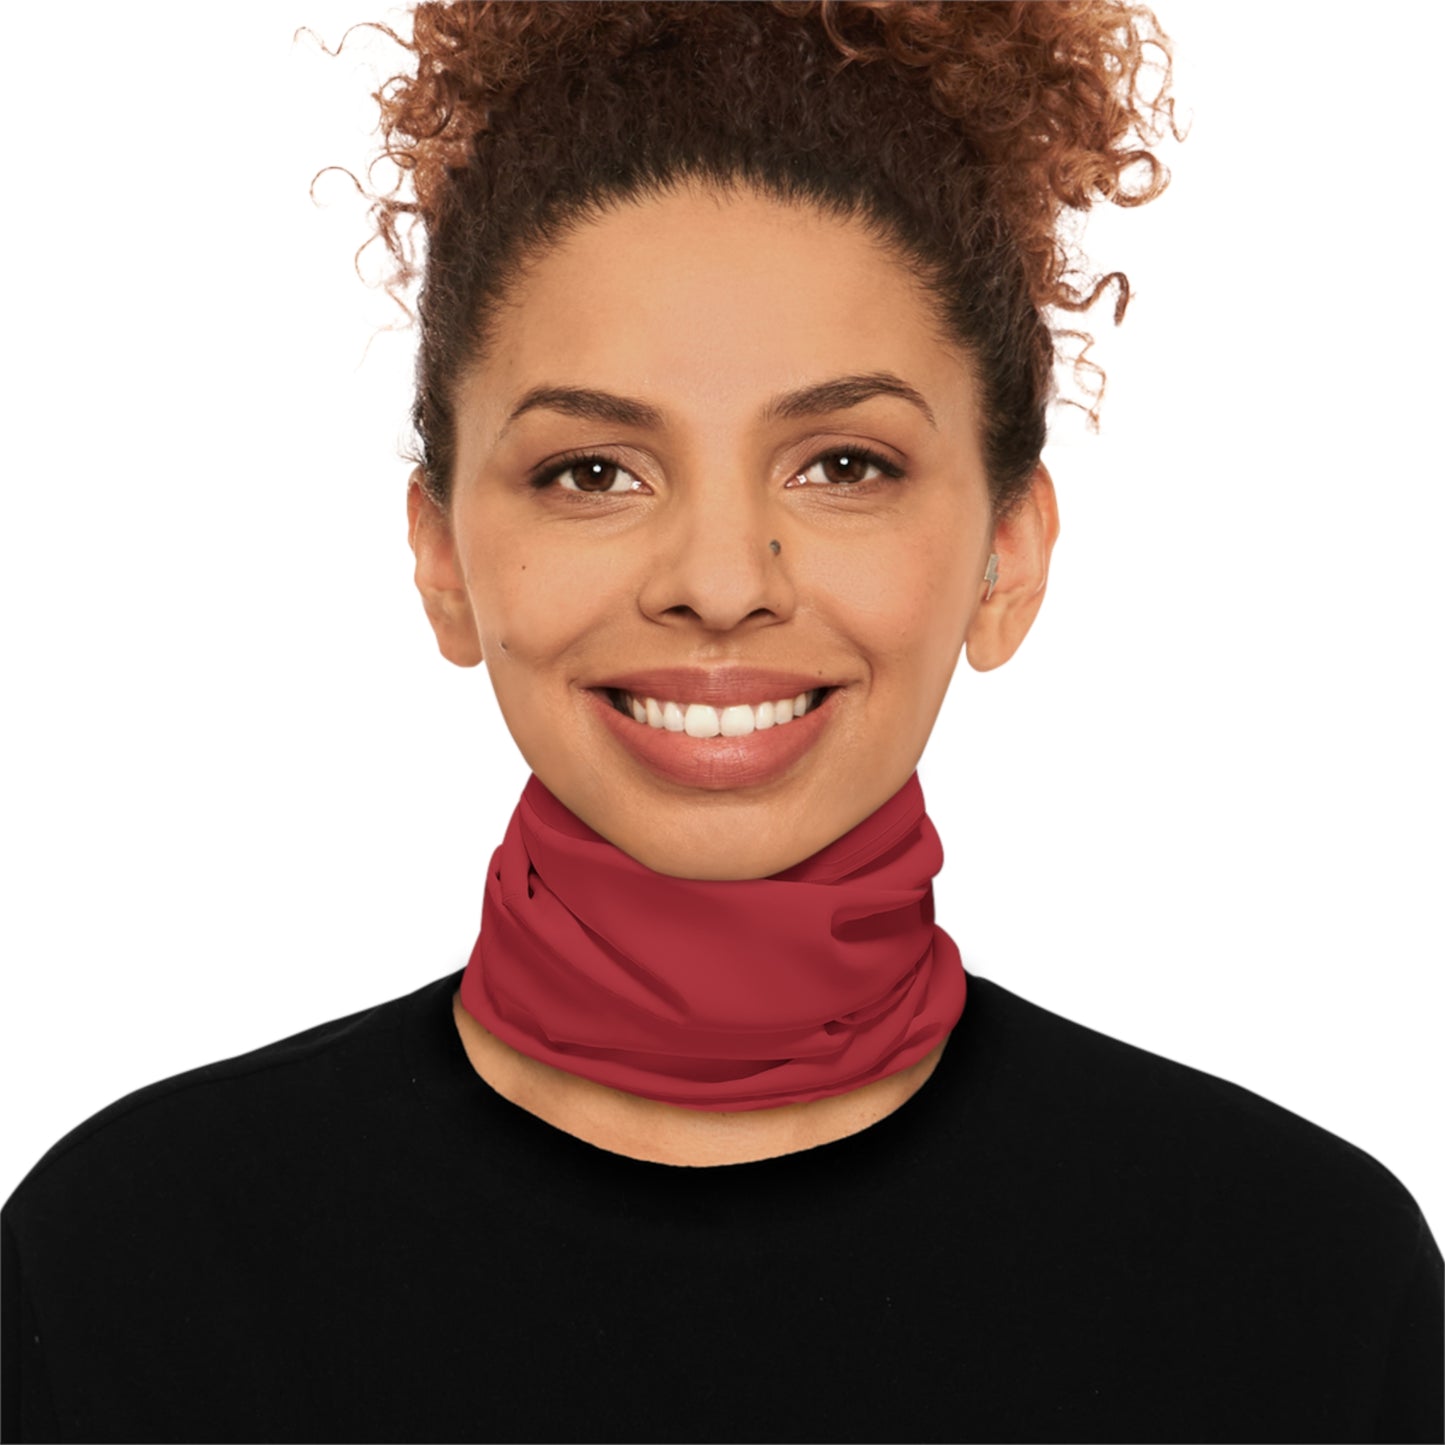 Winter Neck Gaiter With Drawstring - Red